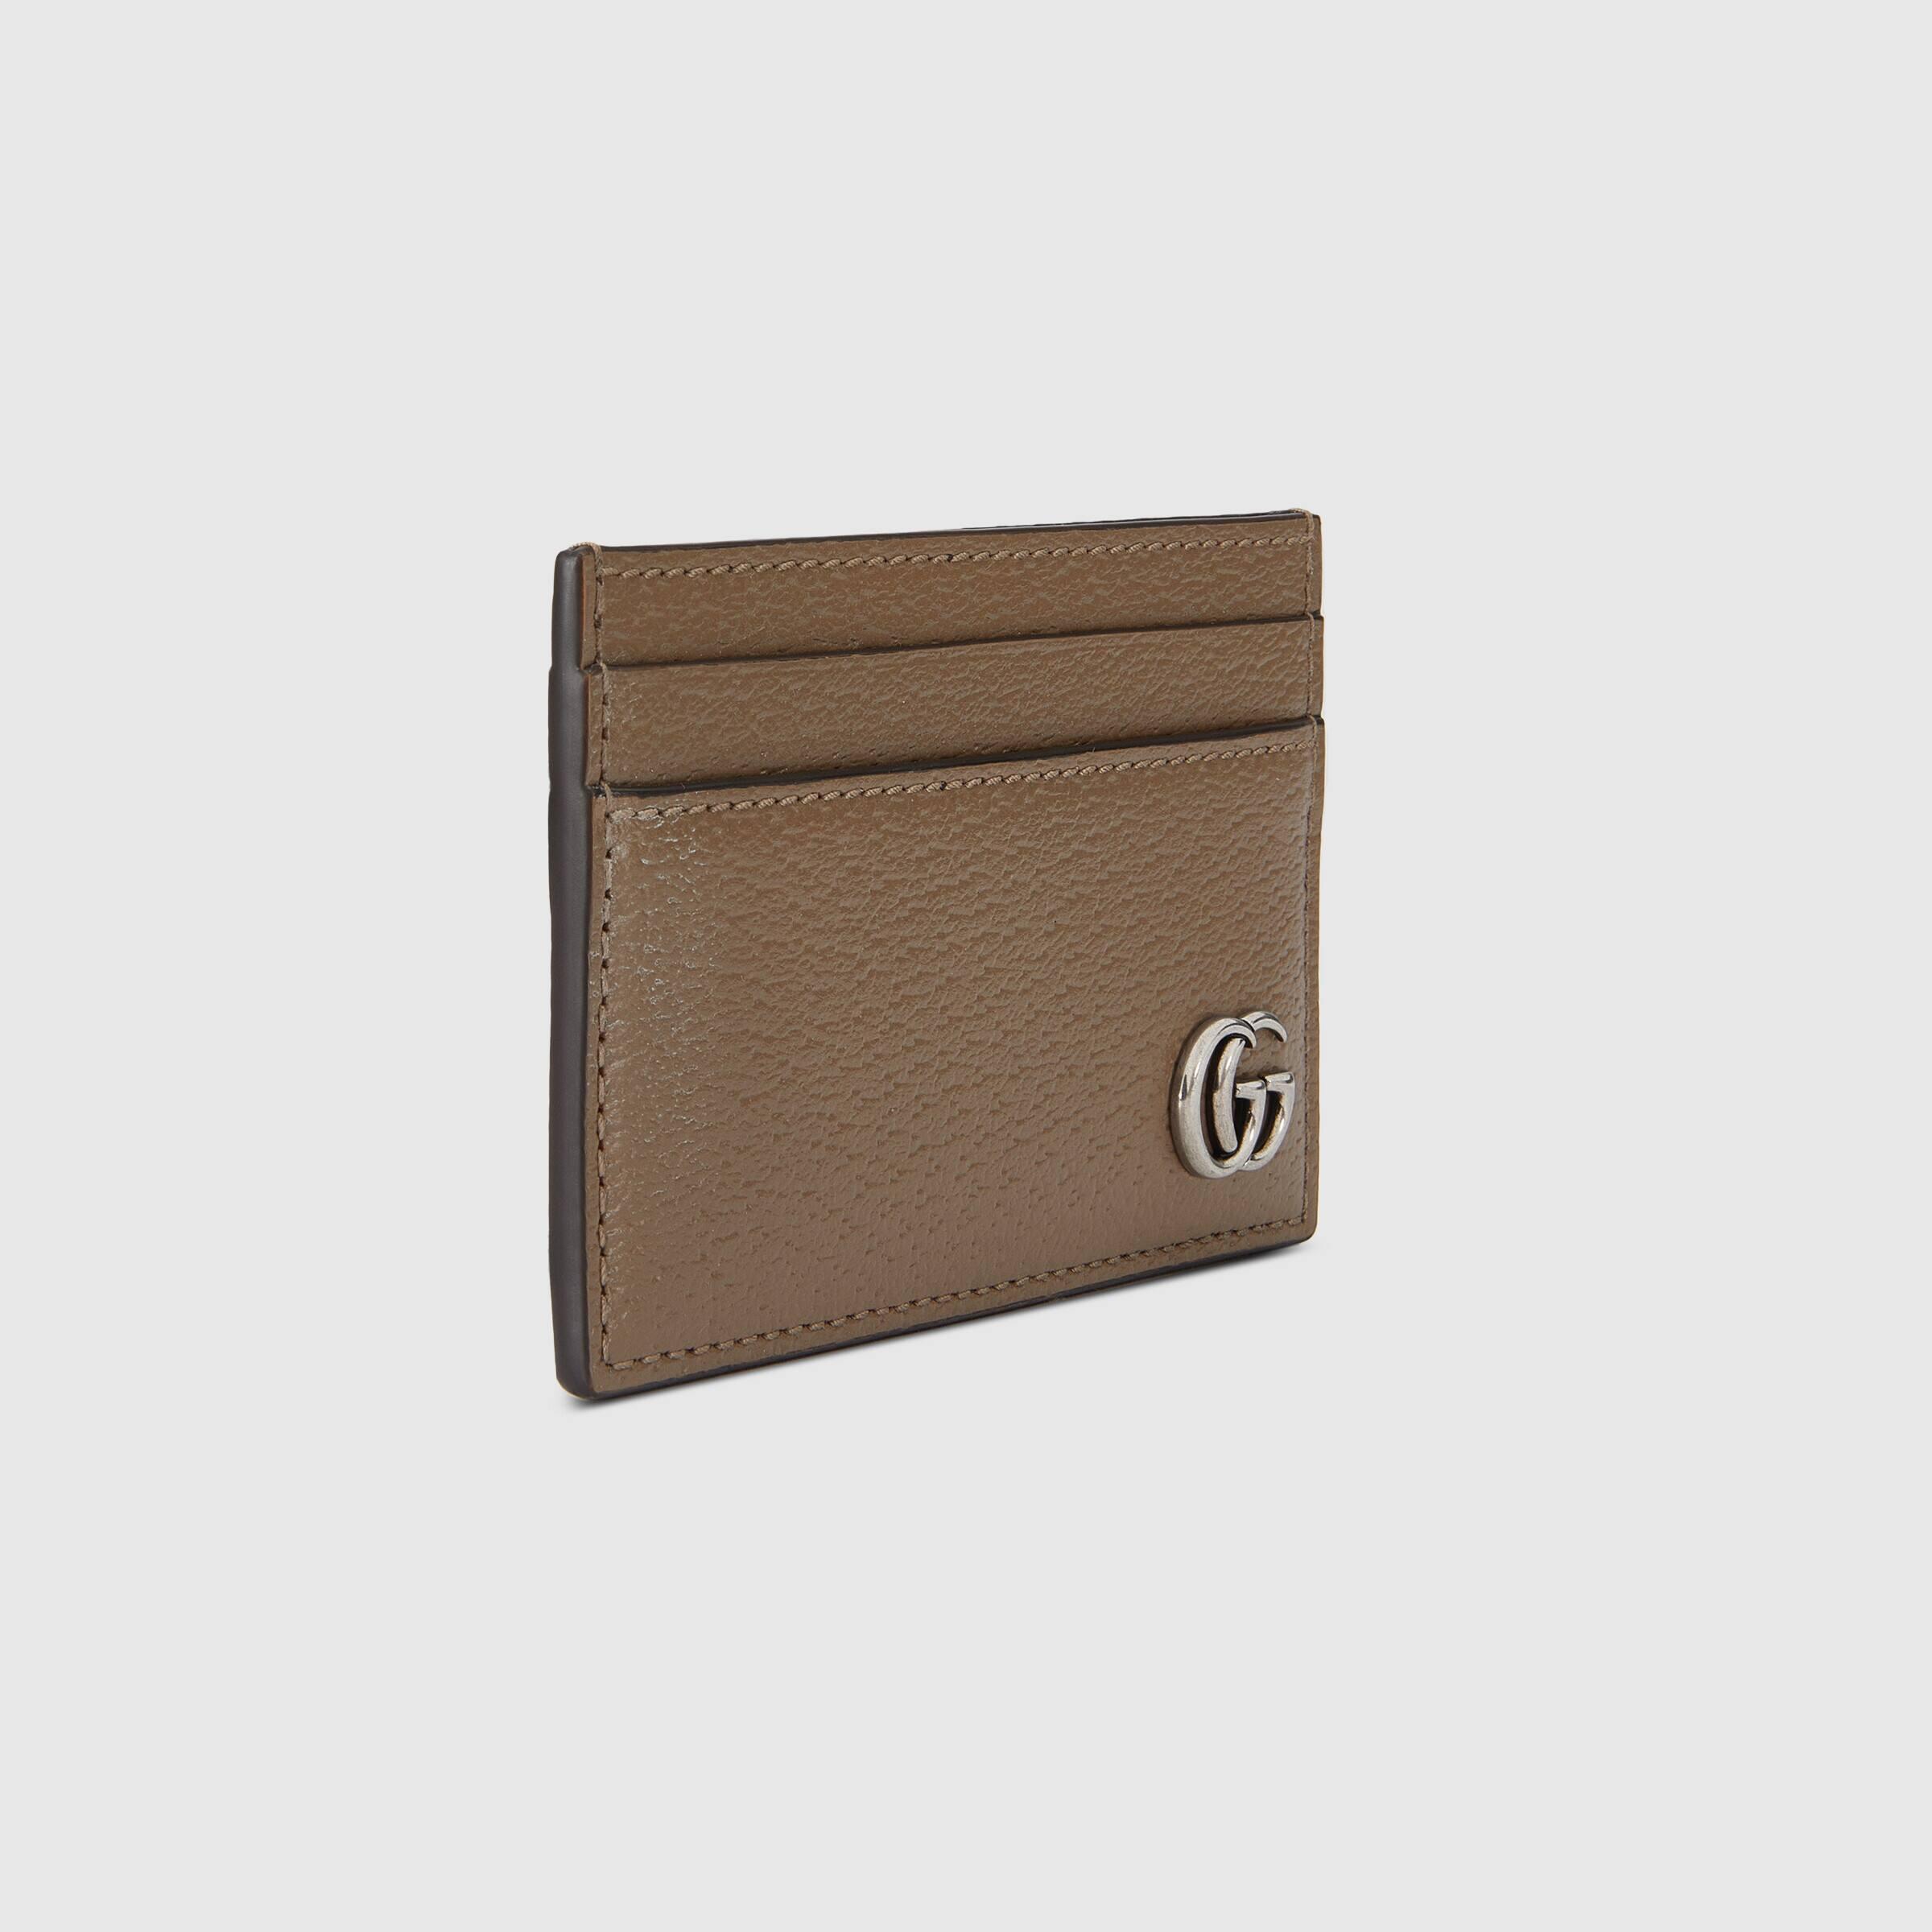 Gucci GG Marmont Card Case in Natural for Men | Lyst